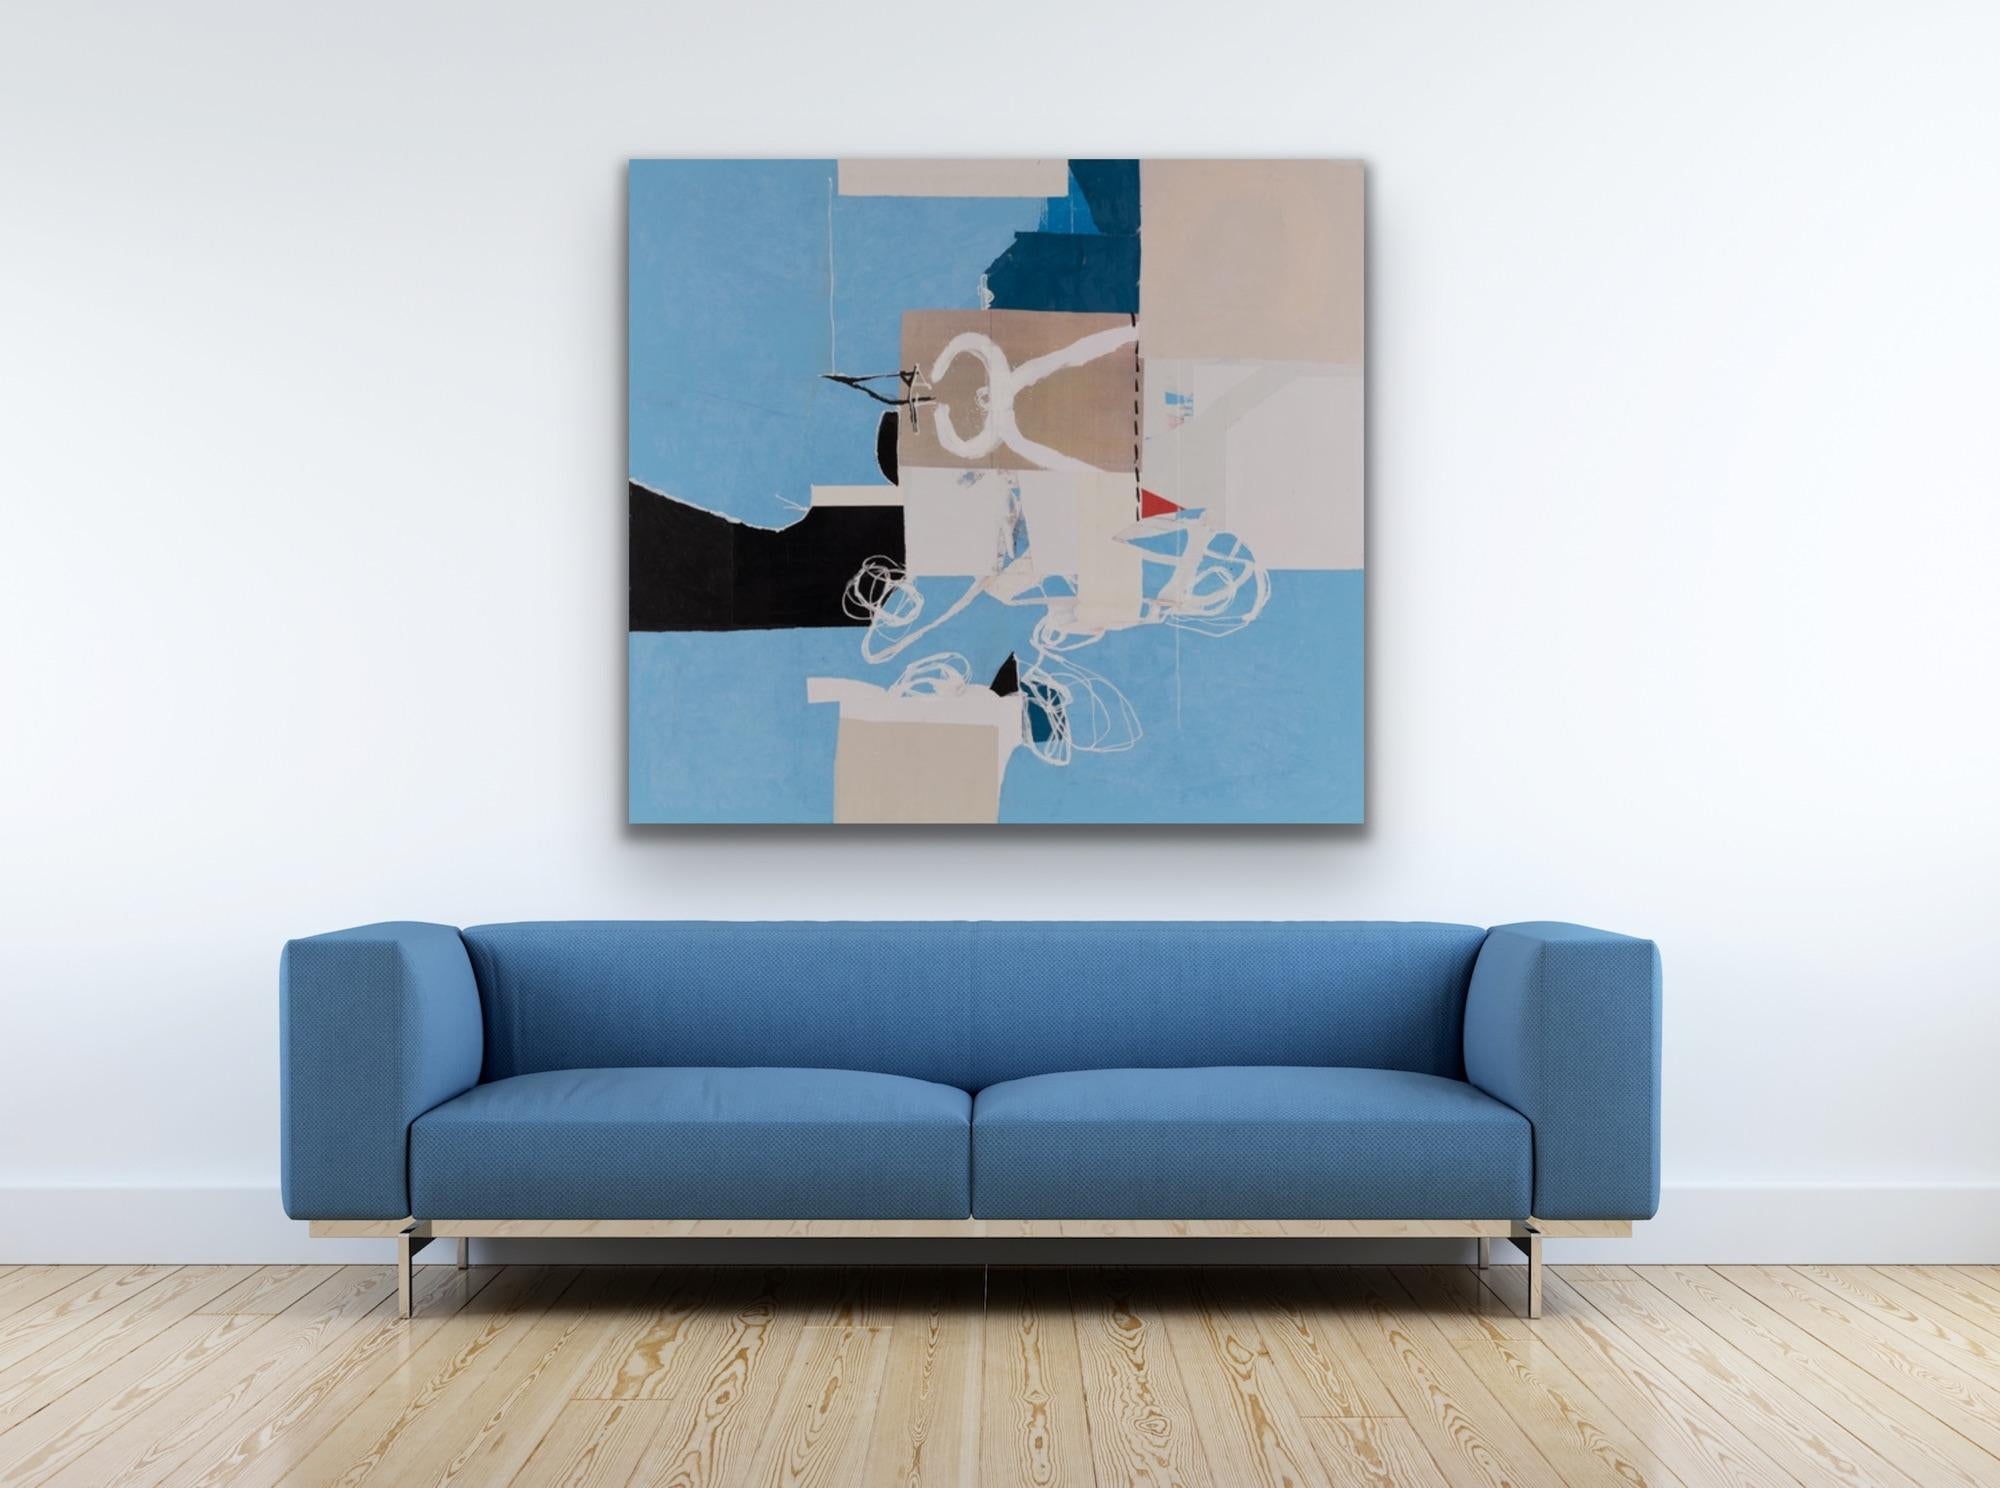 BLUE WABI-SABI - blue, brown, white and black abstract painting and collage  - Painting by Silvia Poloto